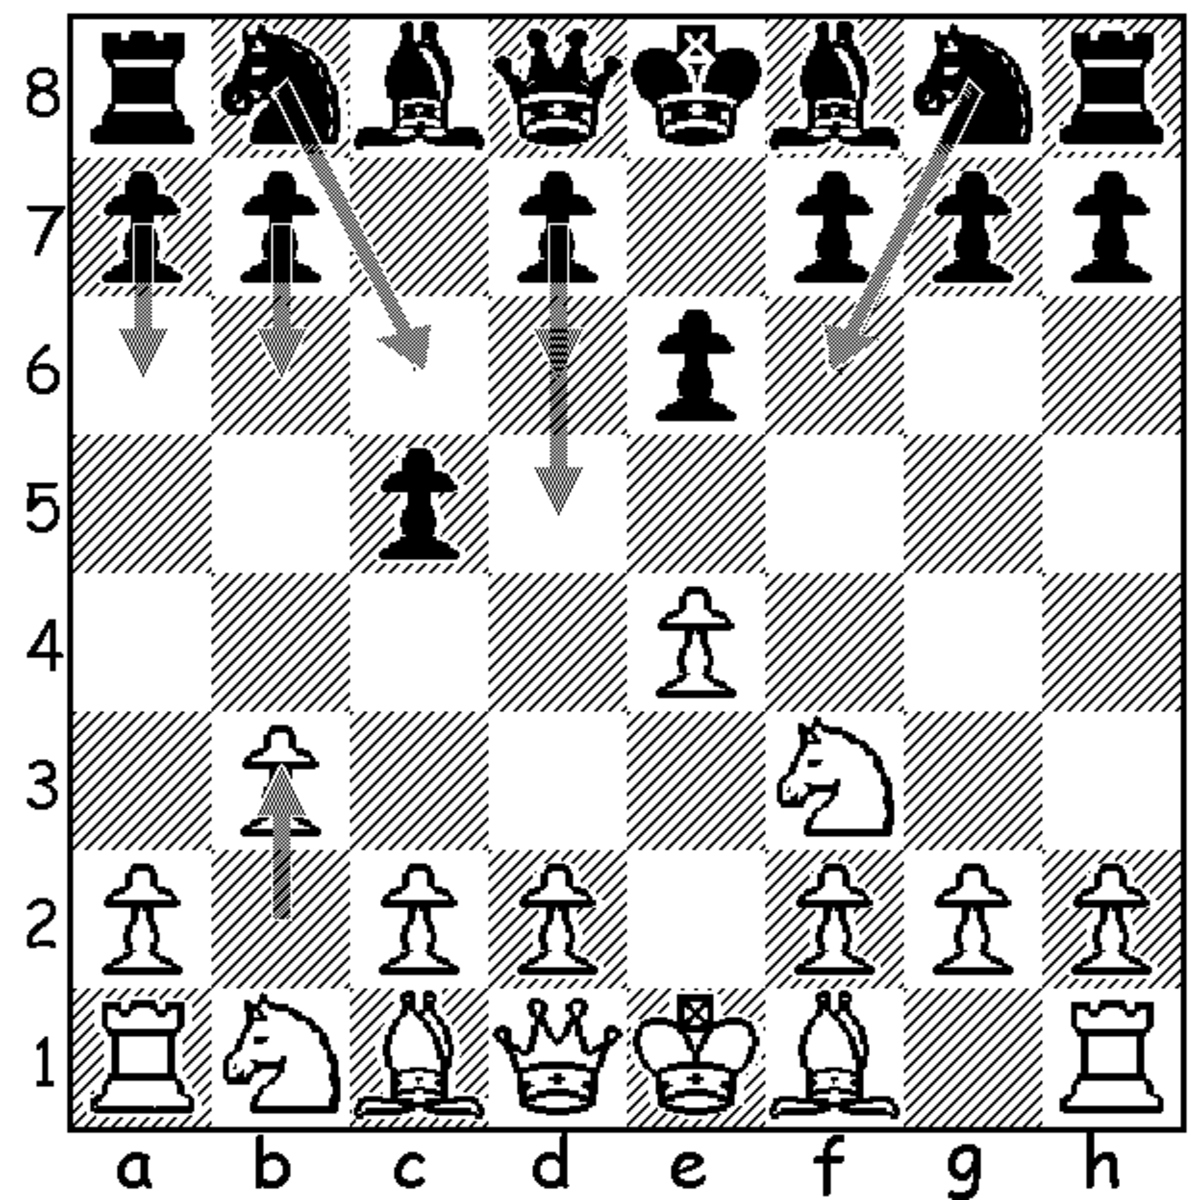 chess-openings-less-explored-viable-options-for-white-against-2e6-in-the-sicilian-defense